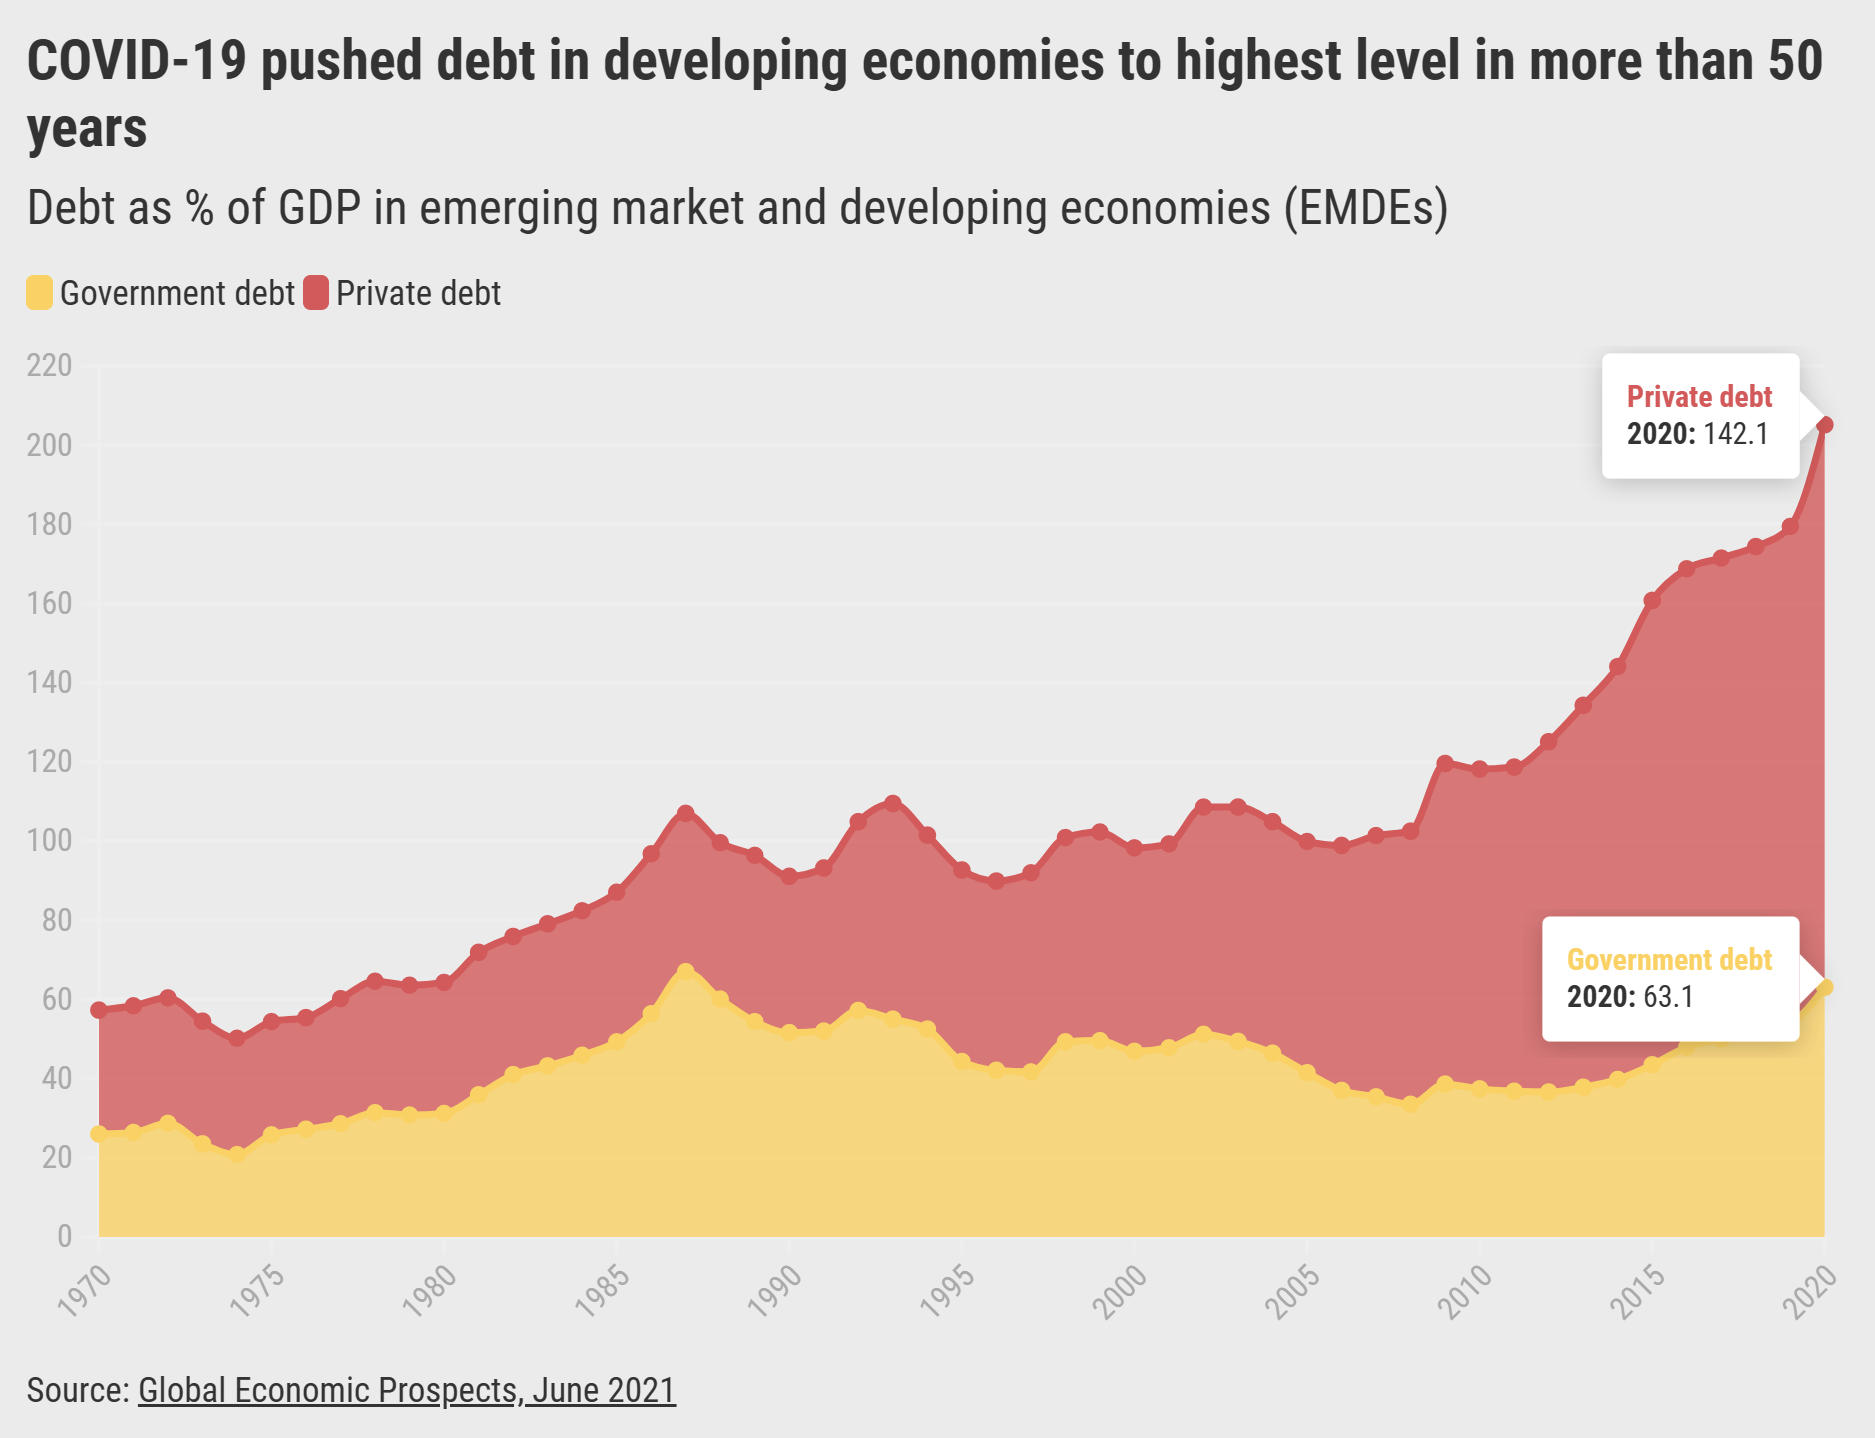 Debt as percentage of GDP in emerging market and developing economies (EMDEs), 1970-2020. COVID-19 pushed debt in developing economies to the highest level in more than 50 years. By the end of 2020, private debt in EMDEs reached a record 142 percent of GDP. Graphic: World Bank